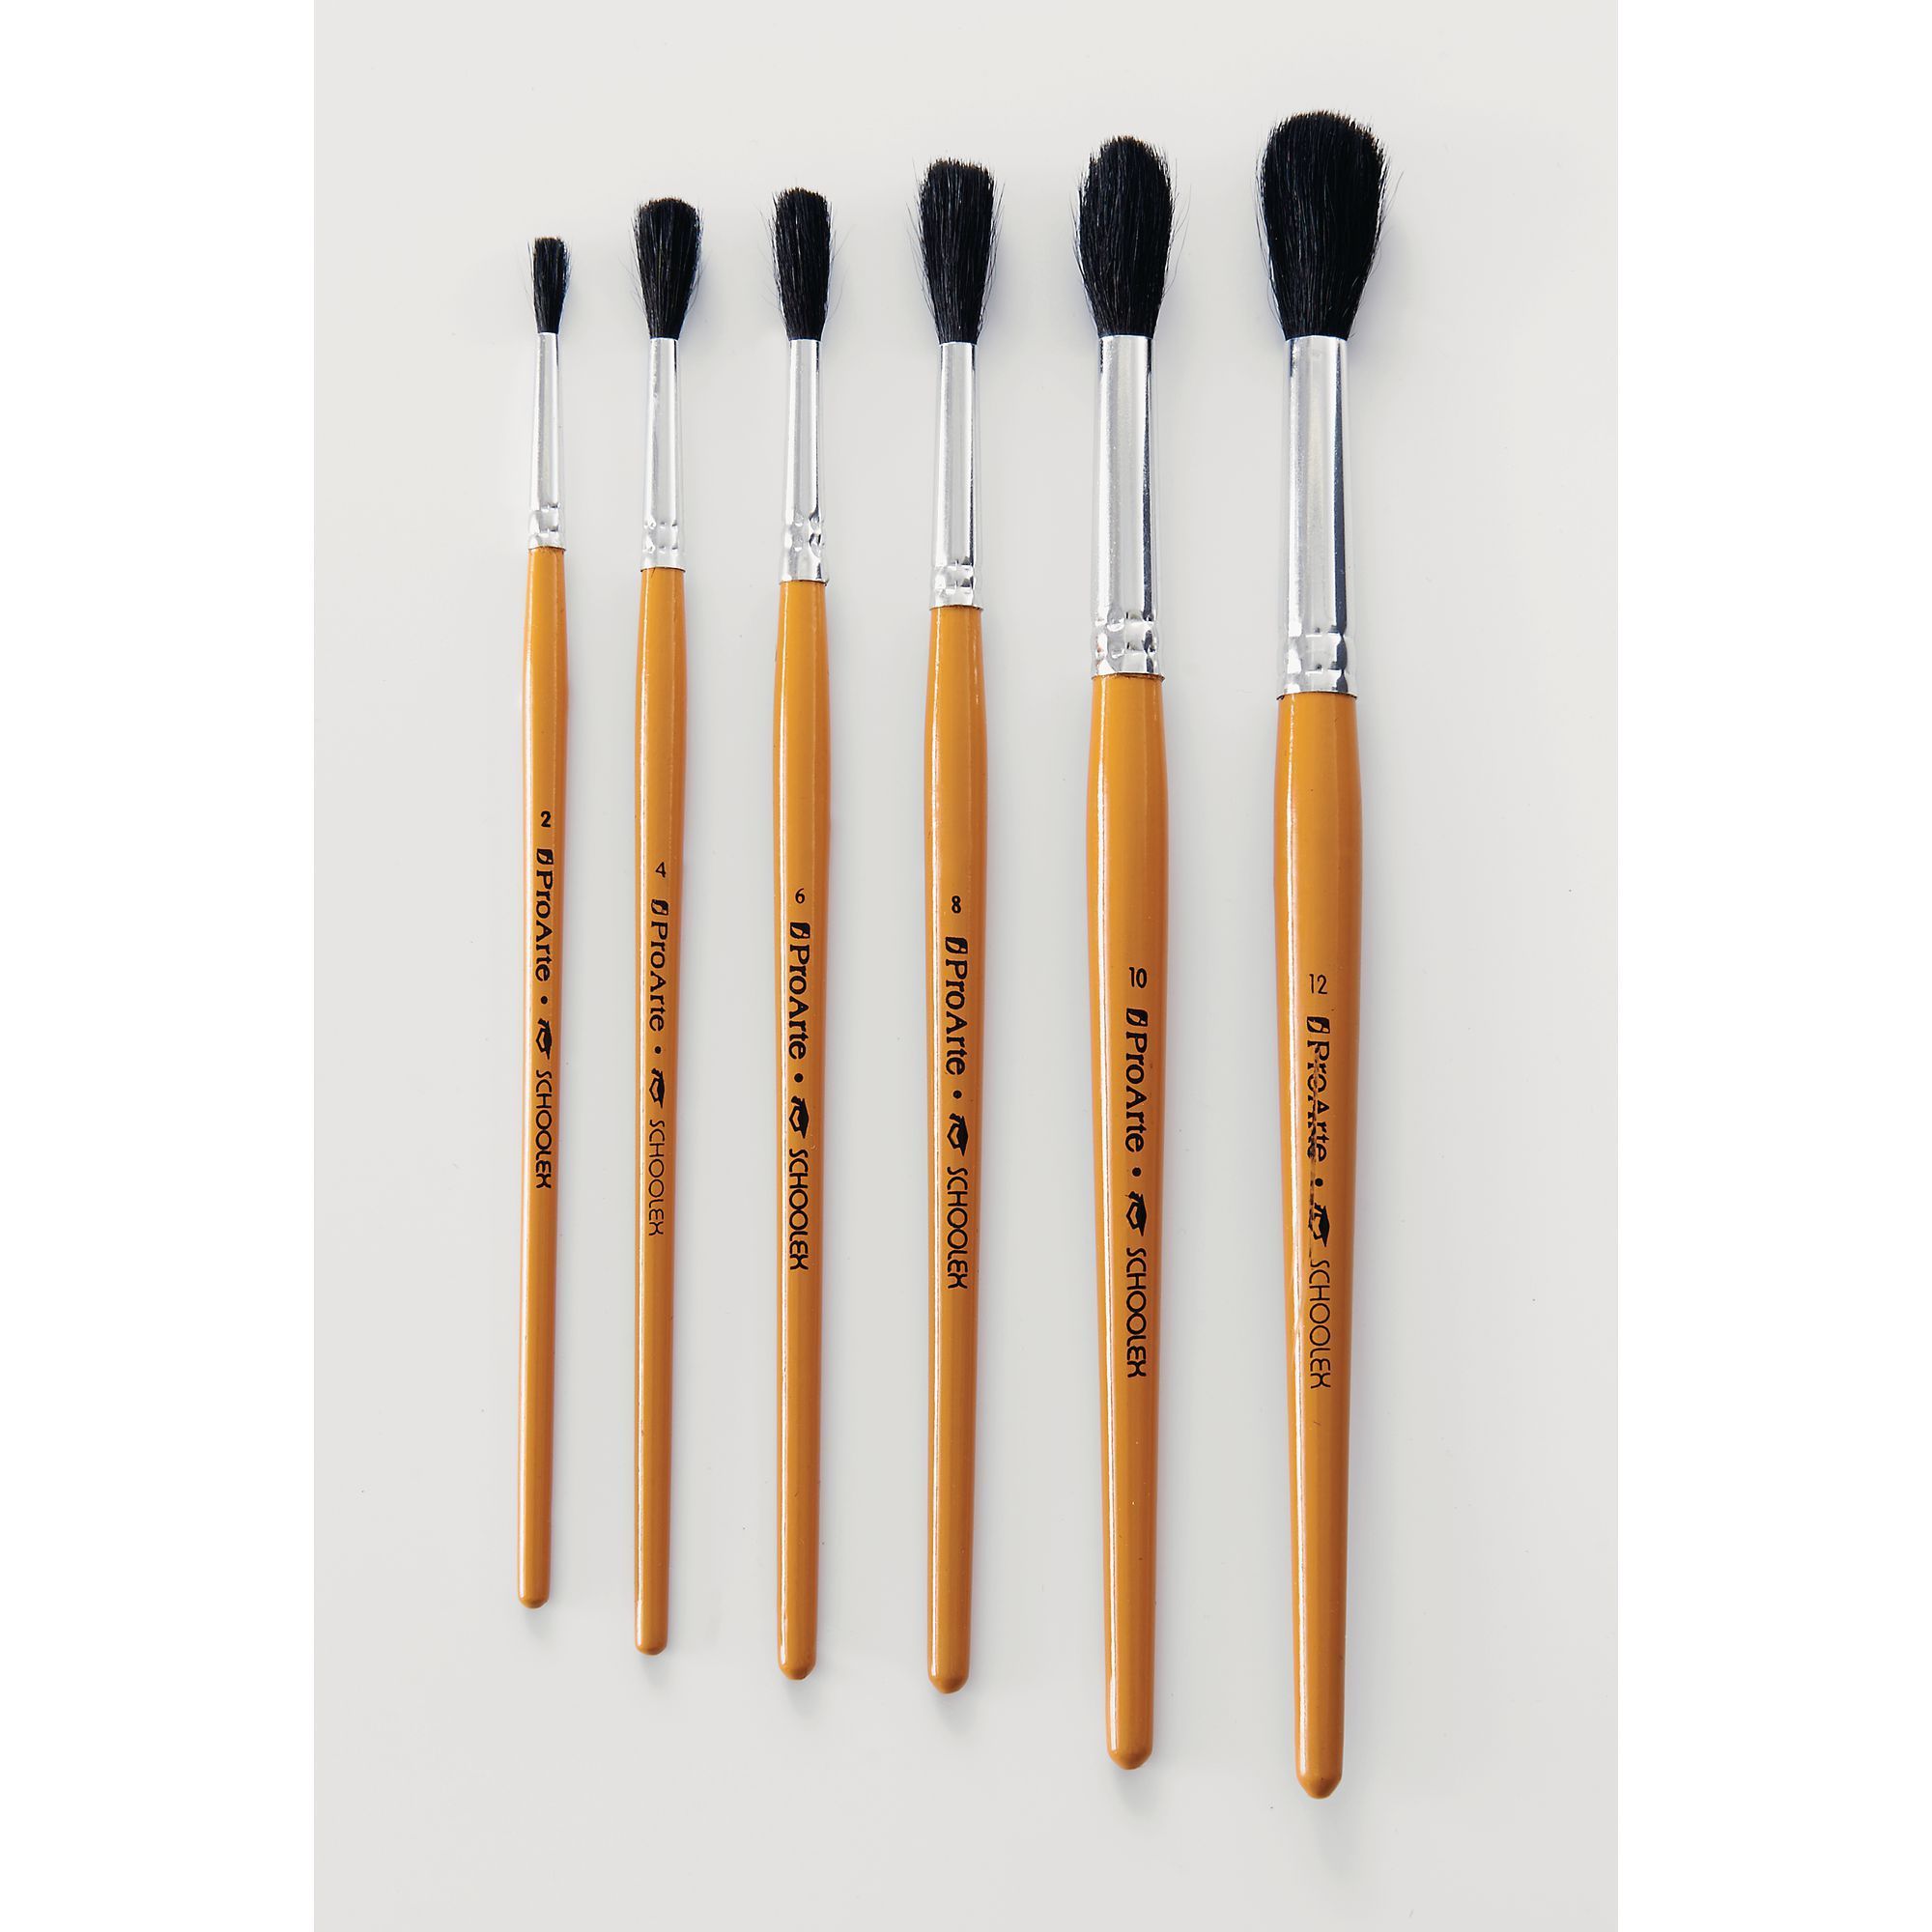 Don reccomend Wooden chubby paint brush